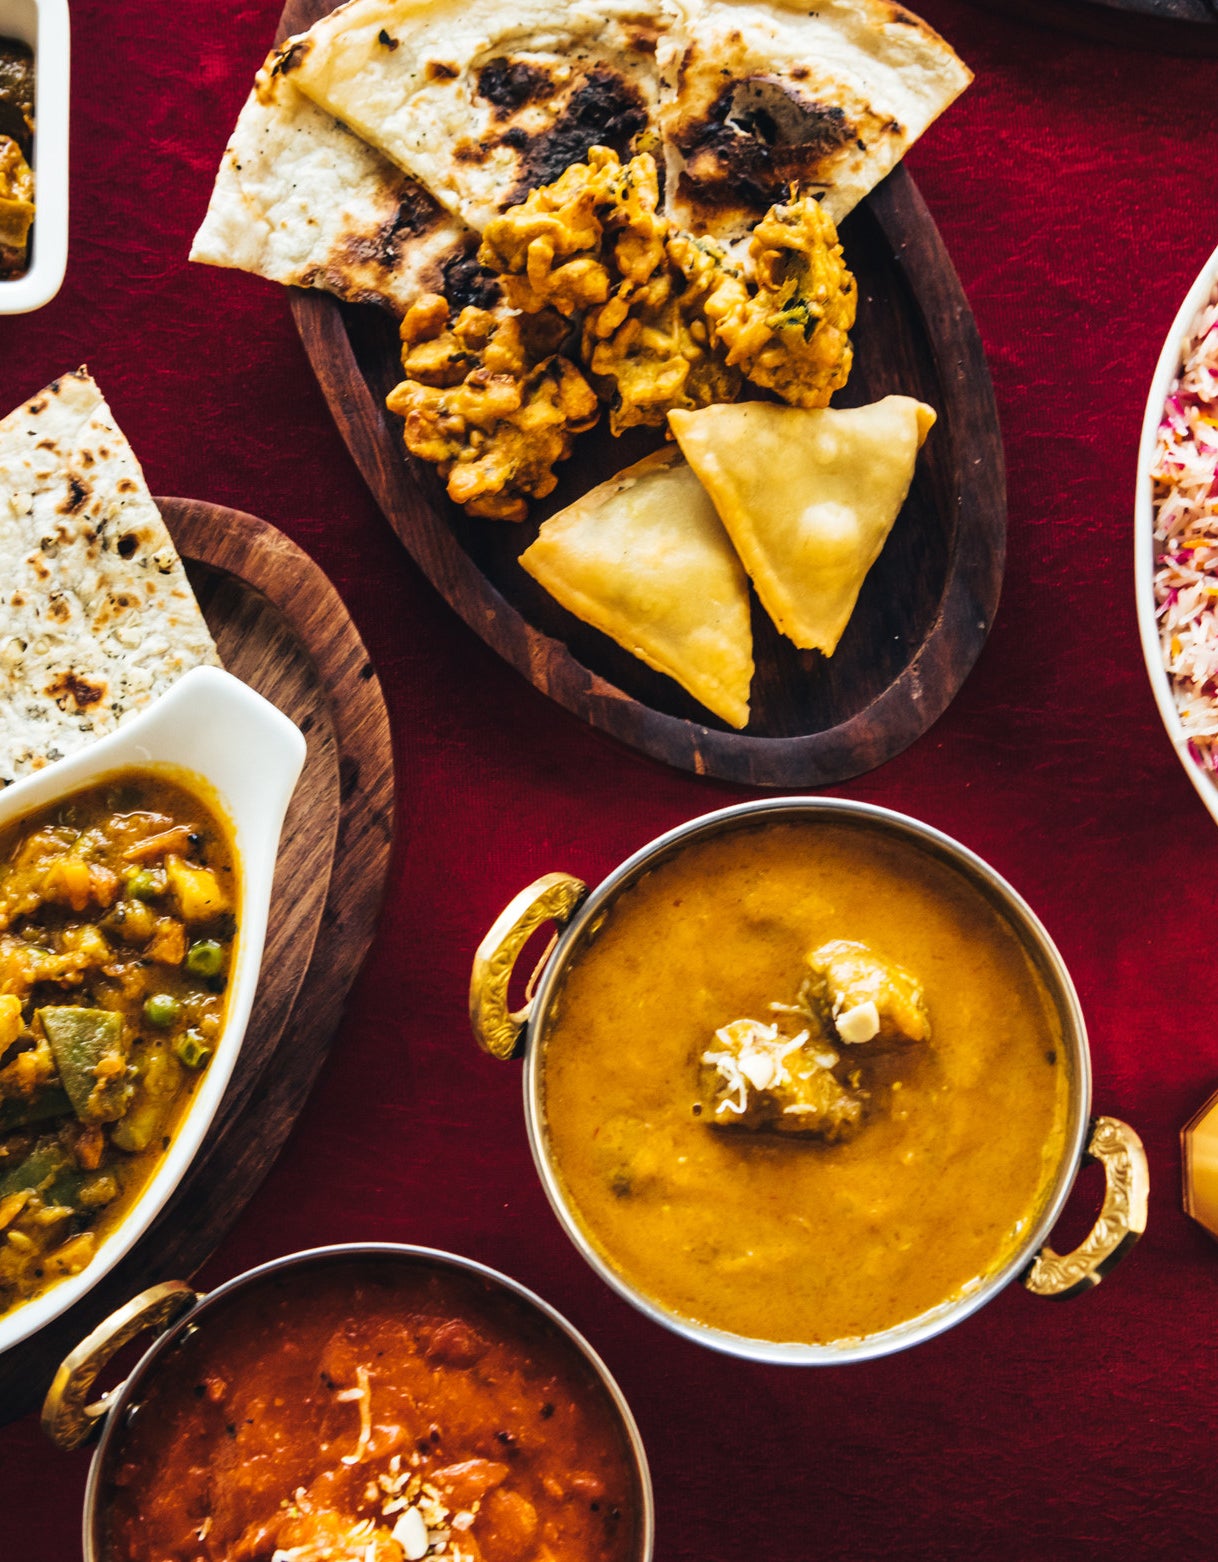 A spread of Indian food.